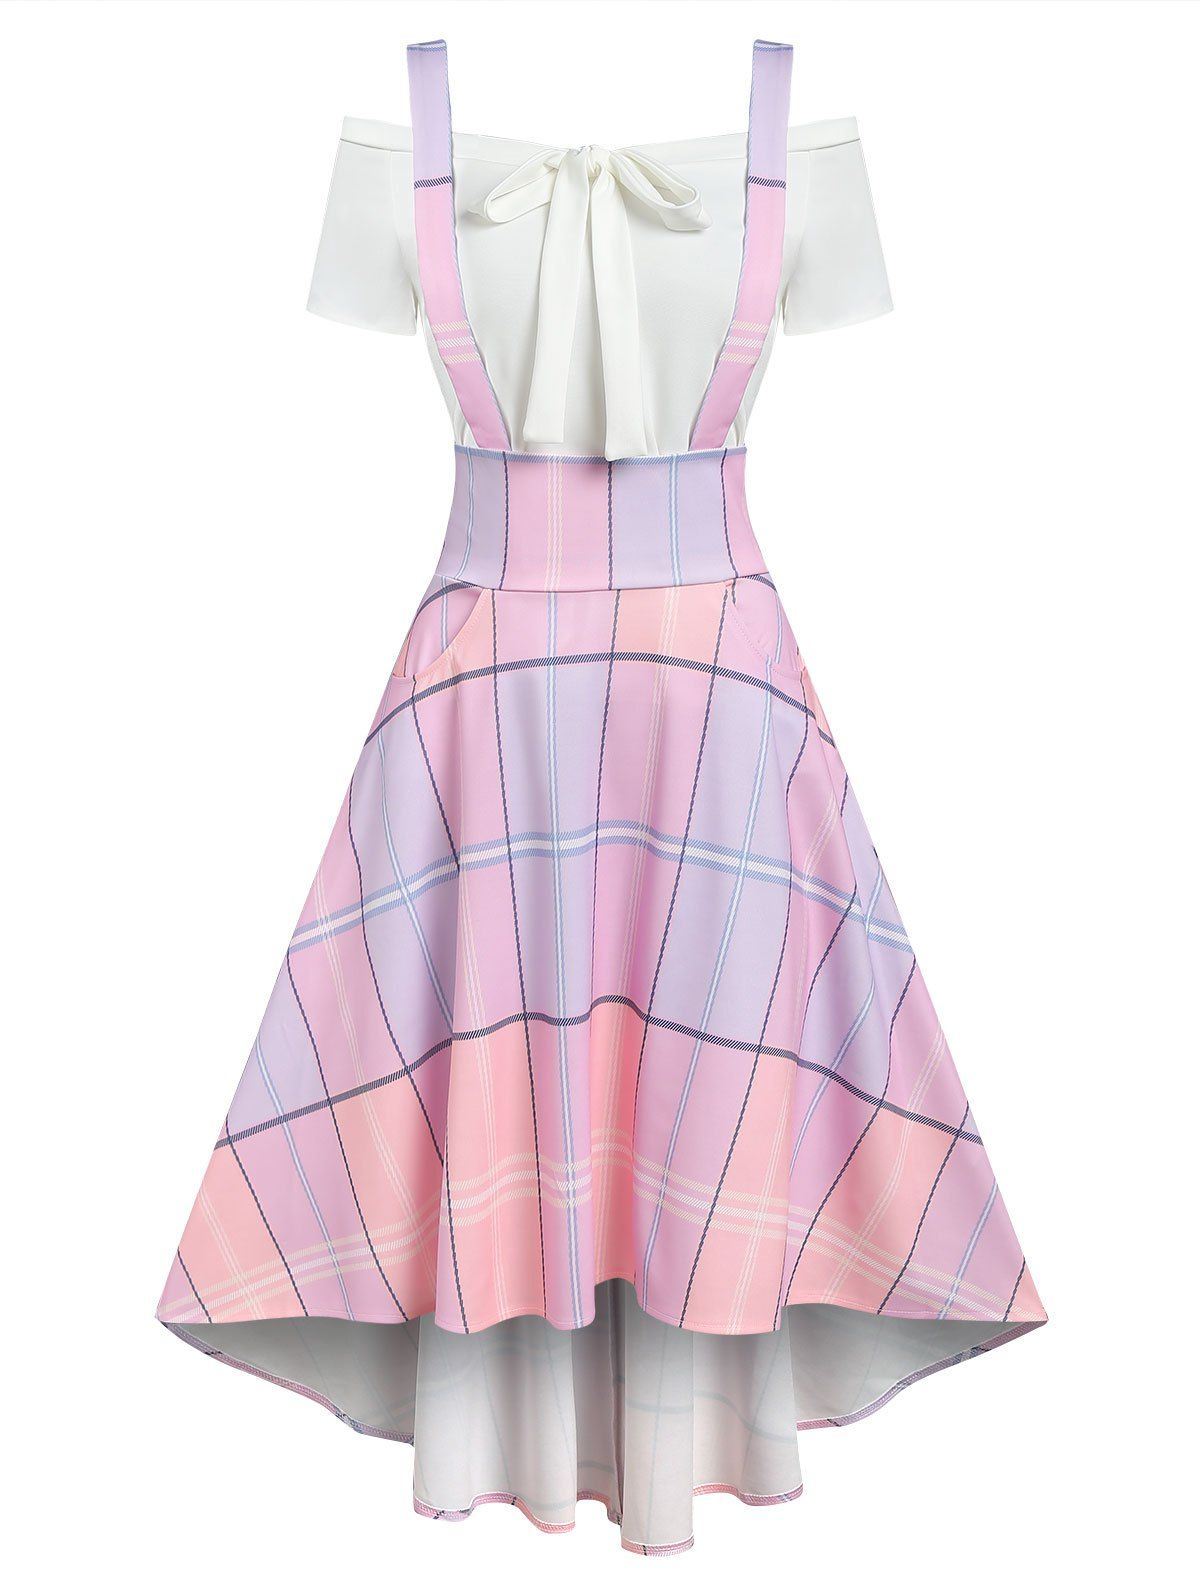 Bow Tie Tee and Pocket High Low Suspender Dress - LIGHT PINK XL